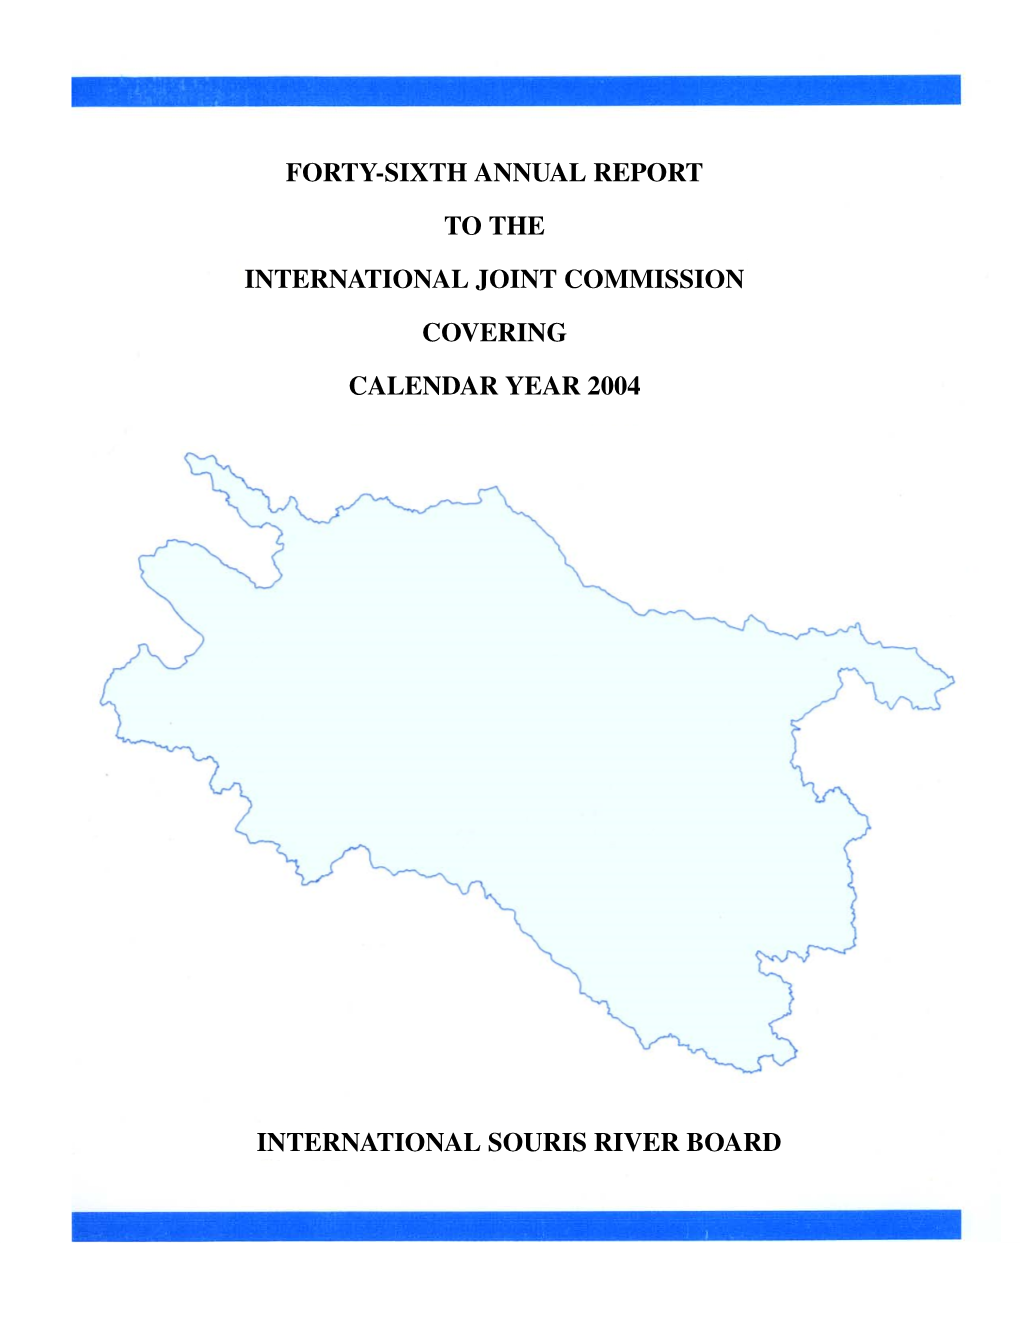 Forty-Sixth Annual Report to the International Joint Commission Covering Calendar Year 2004